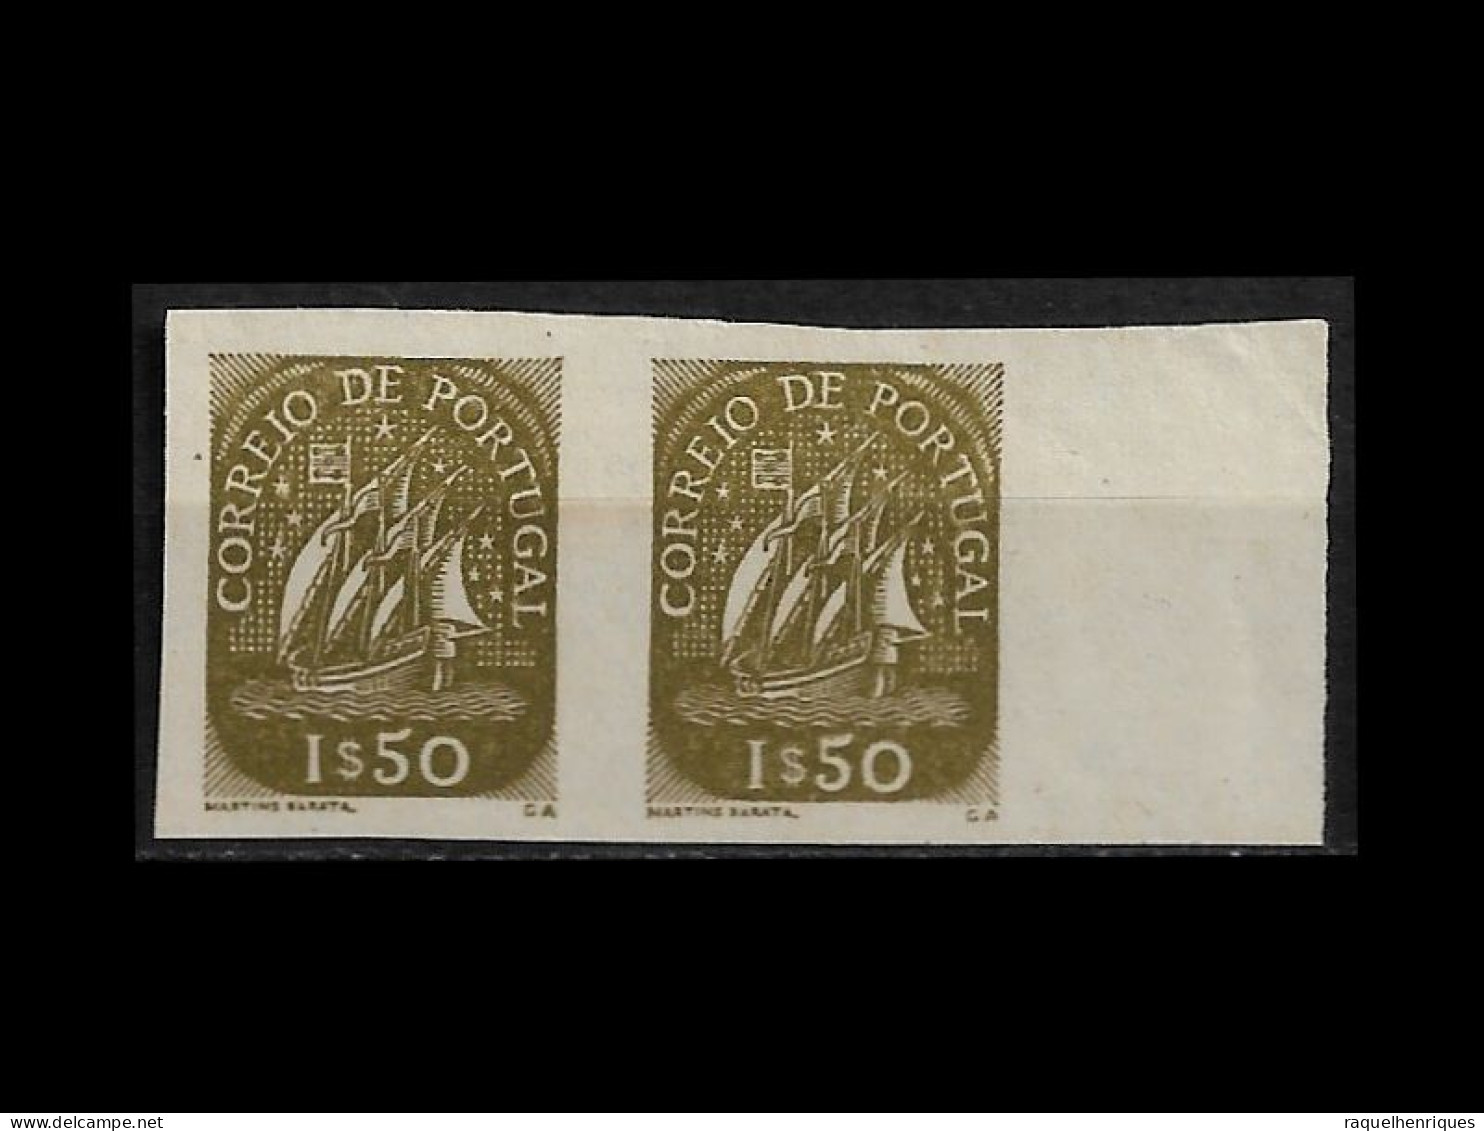 PORTUGAL STAMP - 1948-49 SHIP - Md#699 IMPERF. PAIR - PROVA - PROOF - MH (LESP#39) - Proofs & Reprints